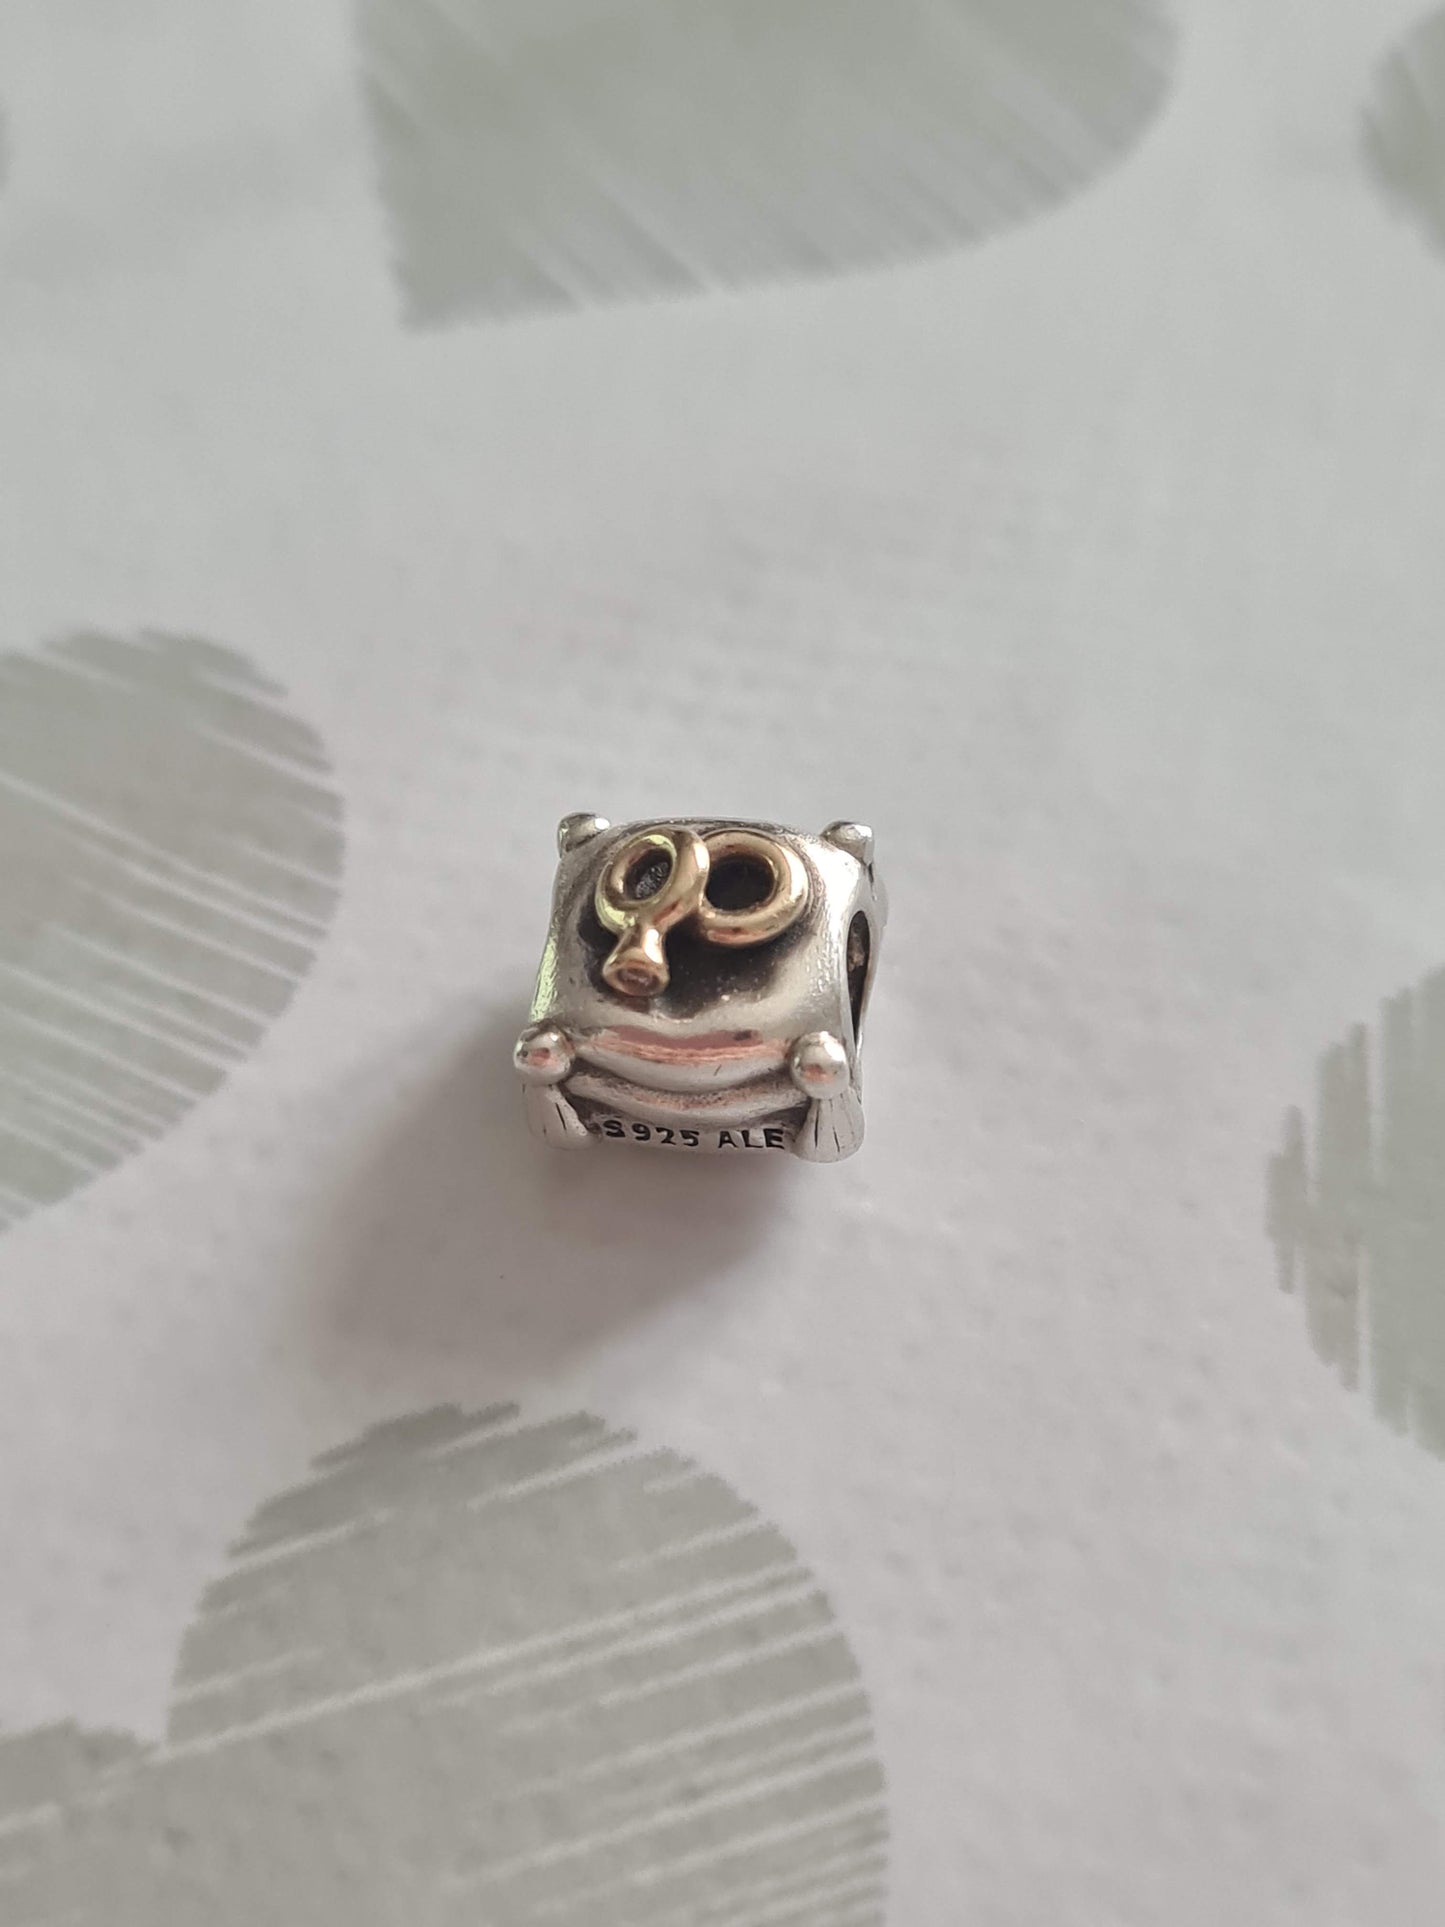 Genuine Pandora Engagement Wedding Rings With Small Diamond On a Pillow Two Tone